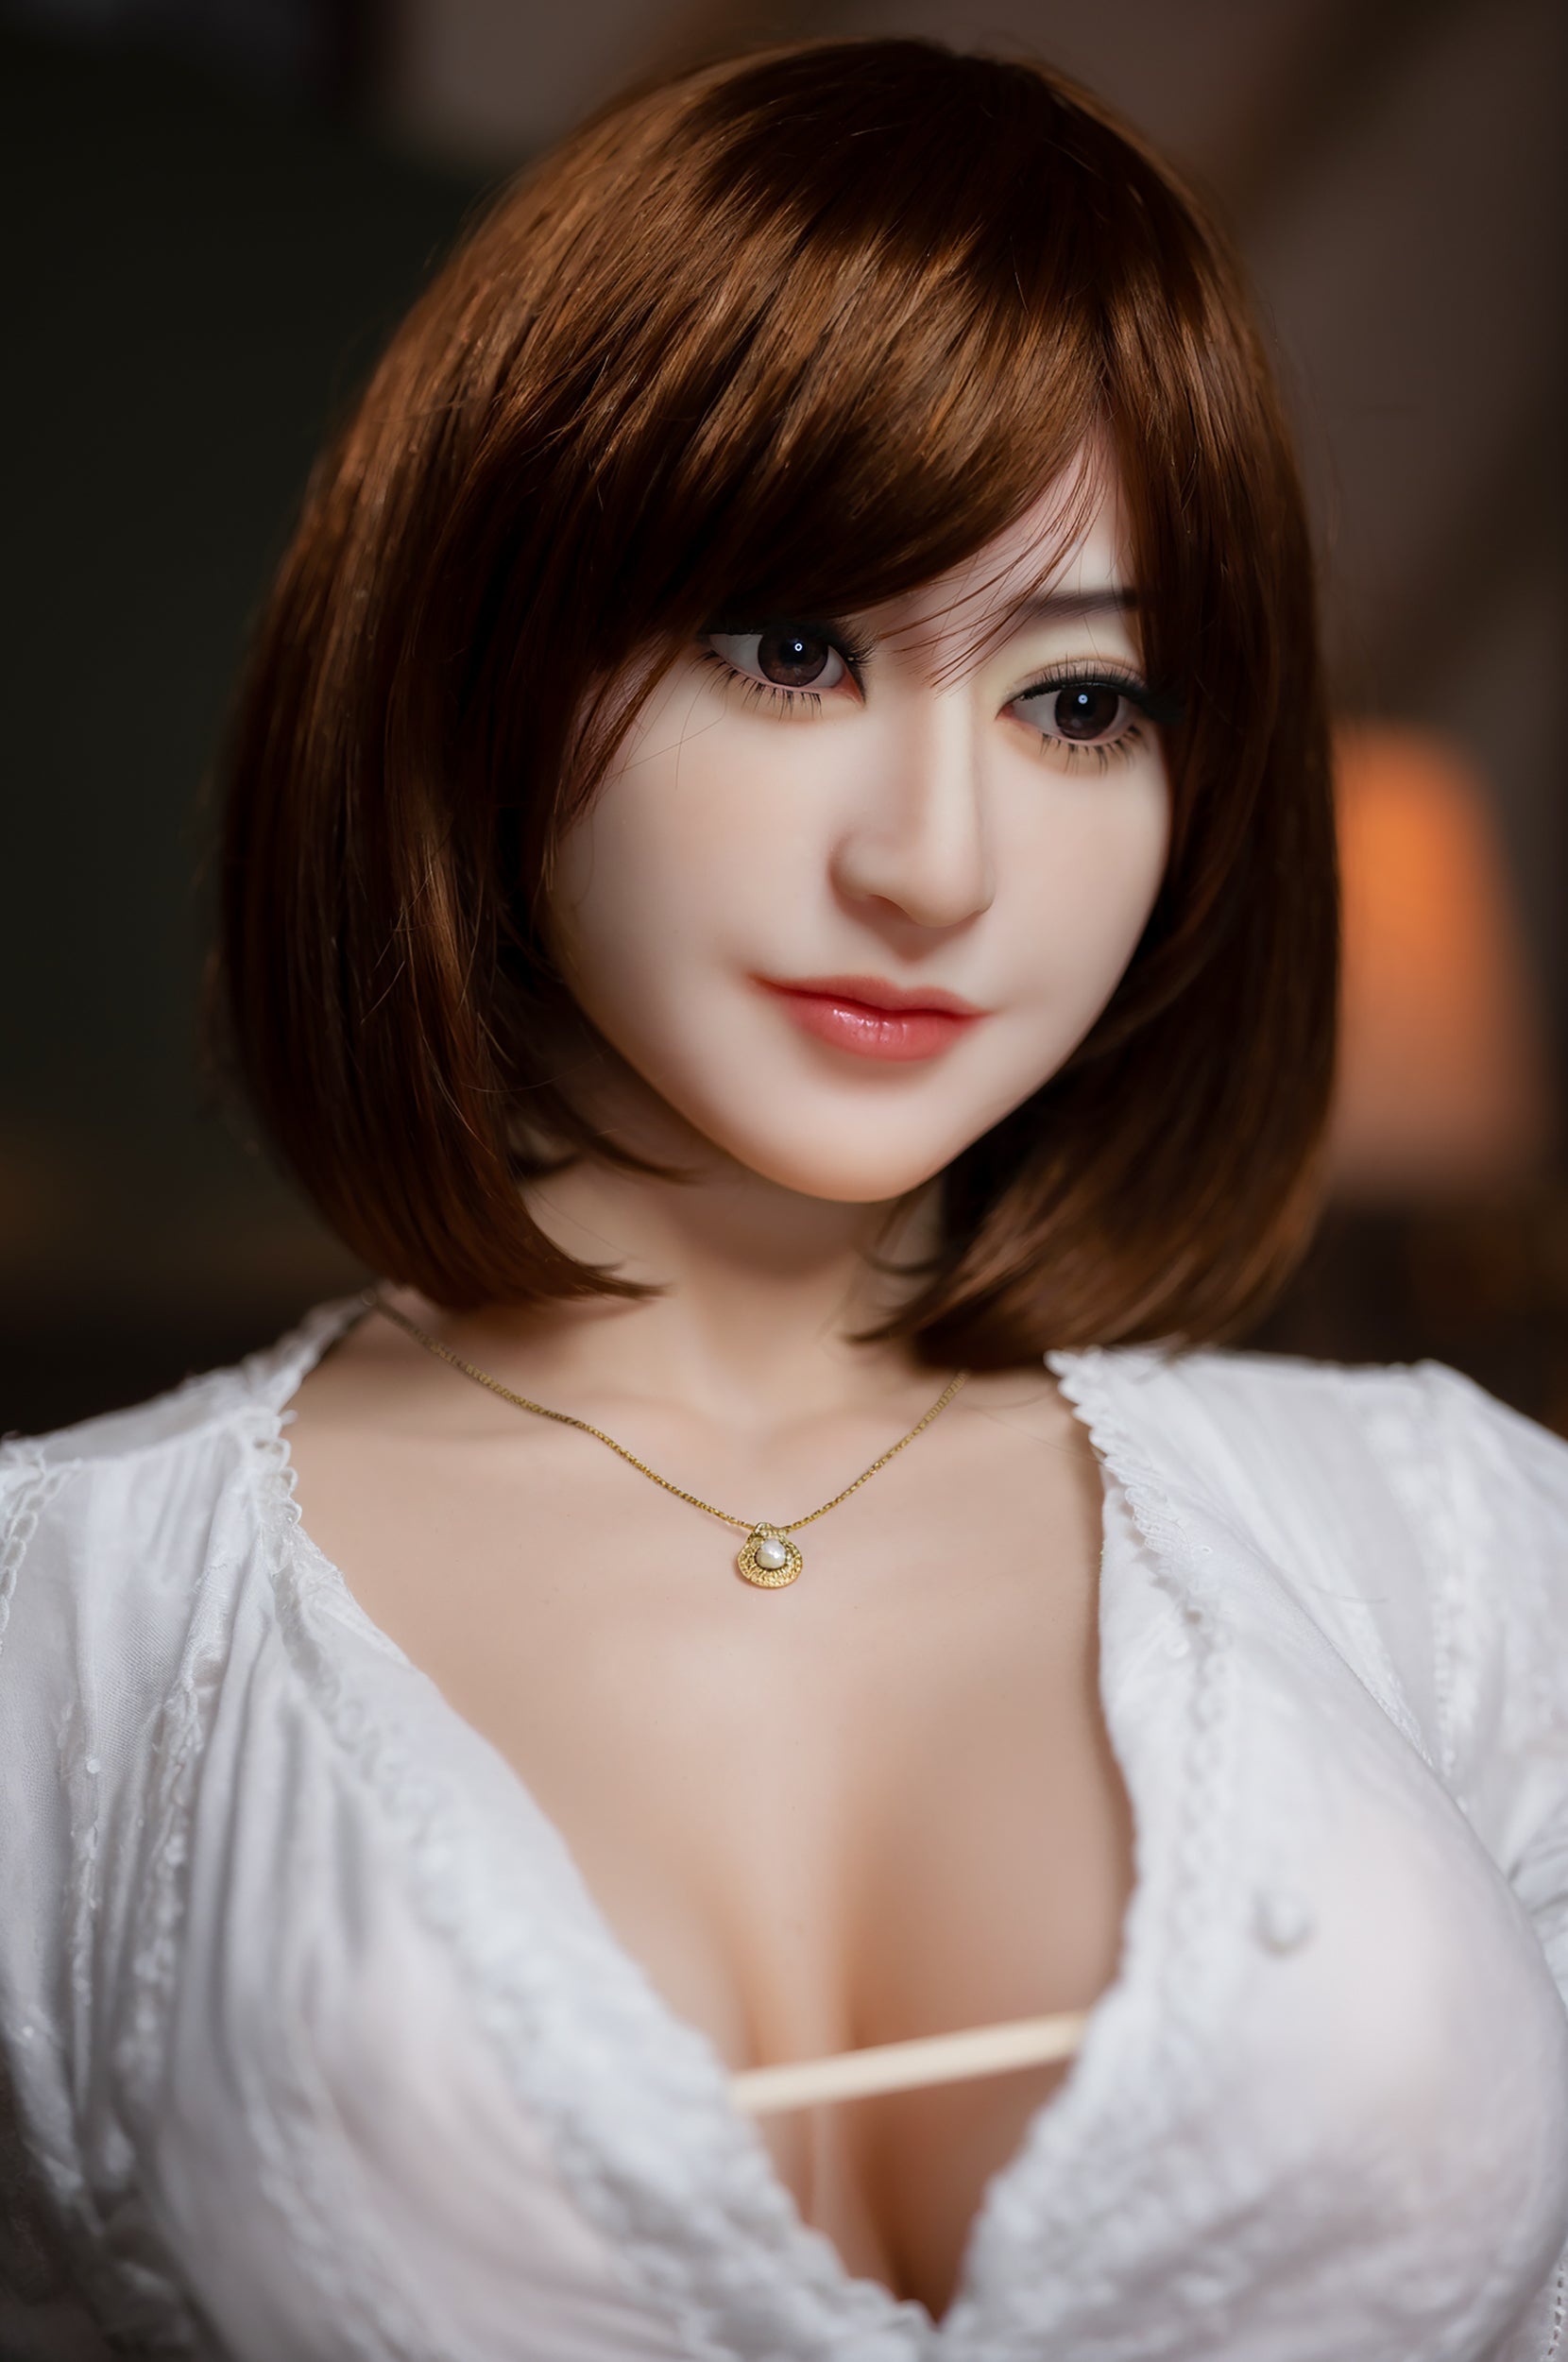 Aibei Doll 158 cm TPE - Noelle | Buy Sex Dolls at DOLLS ACTUALLY